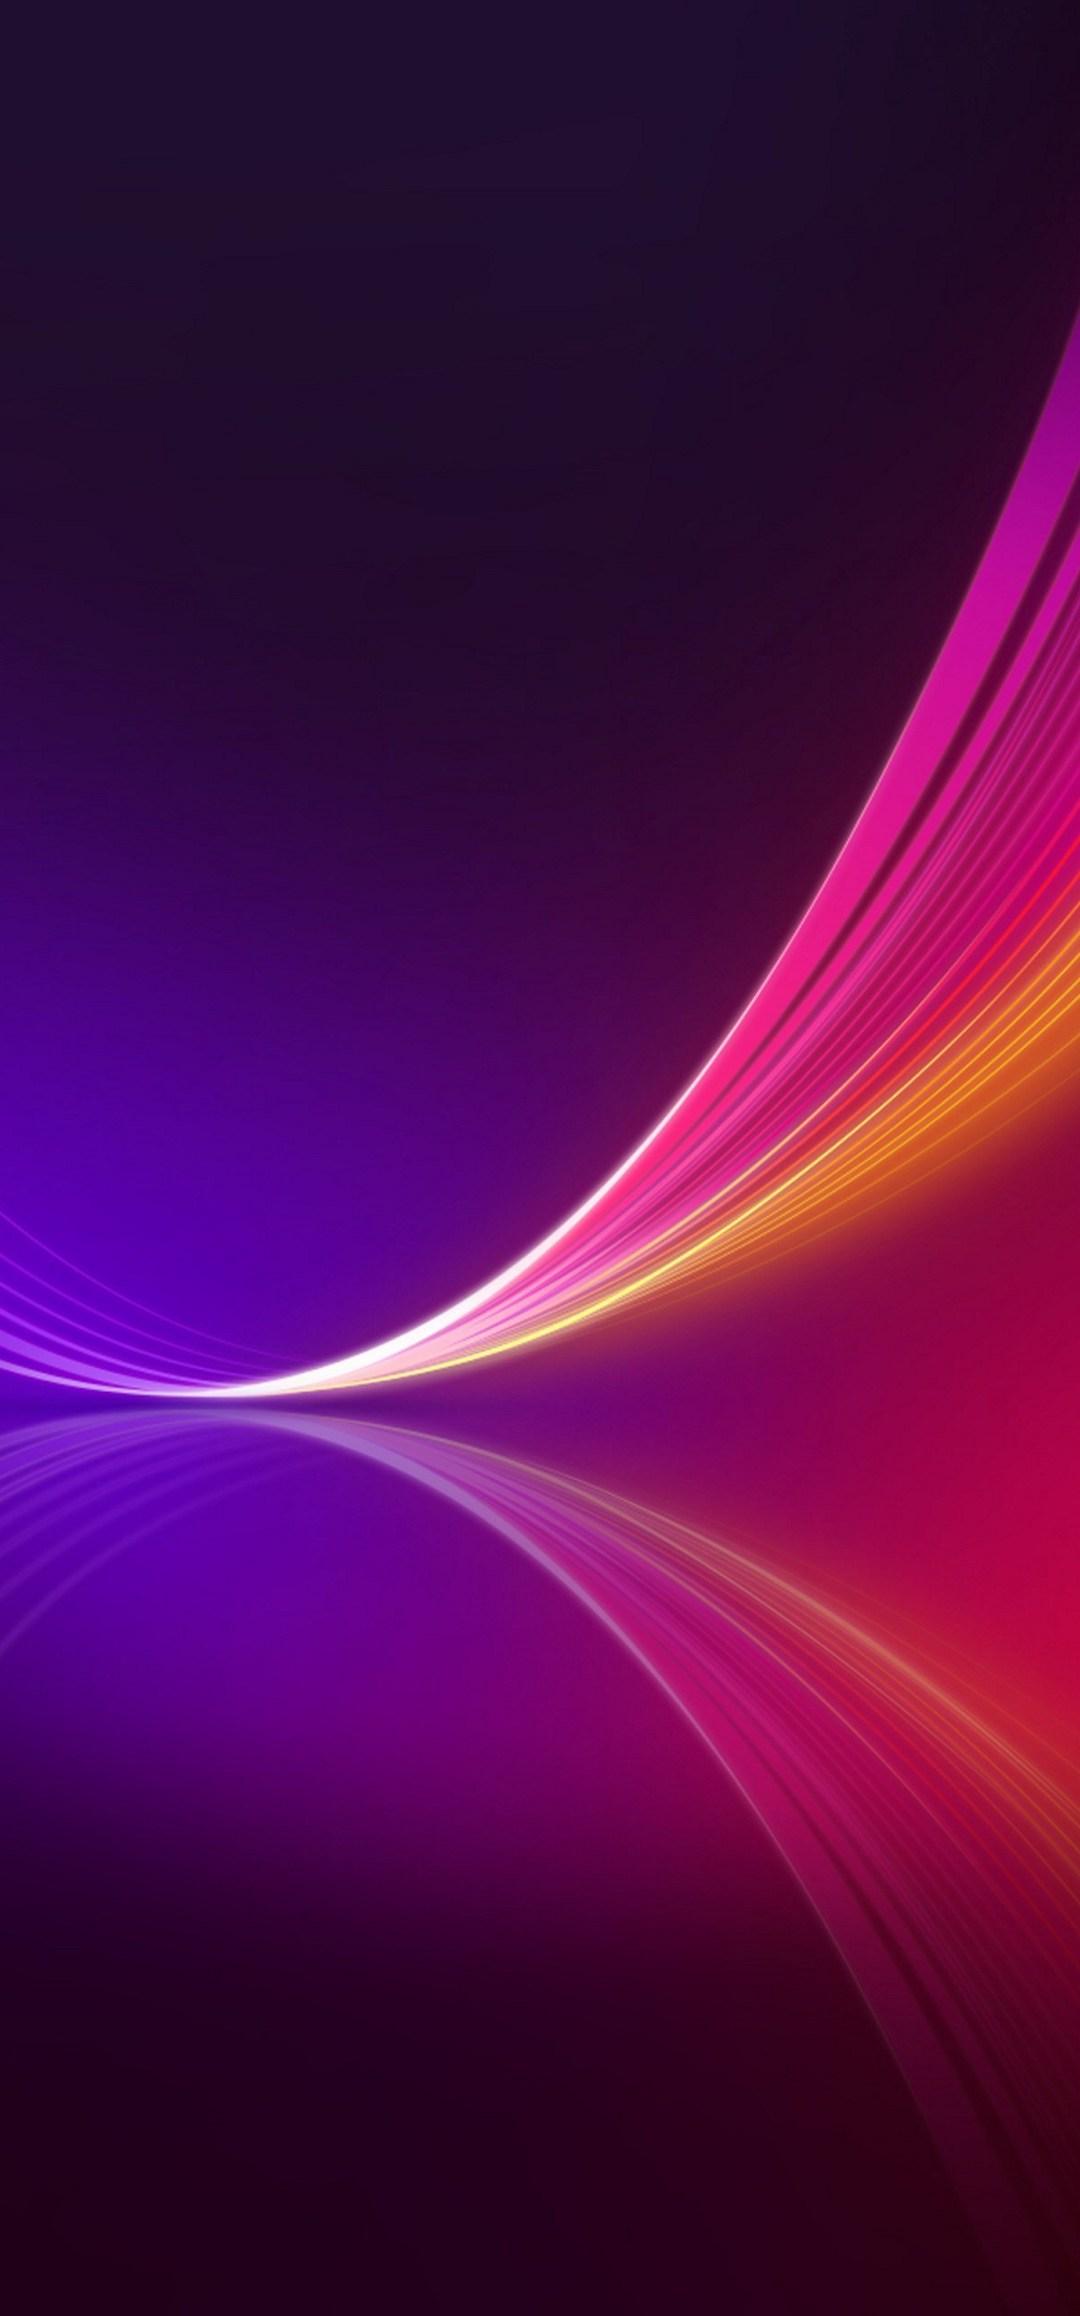 1080x2316 Backgrounds HD Wallpapers